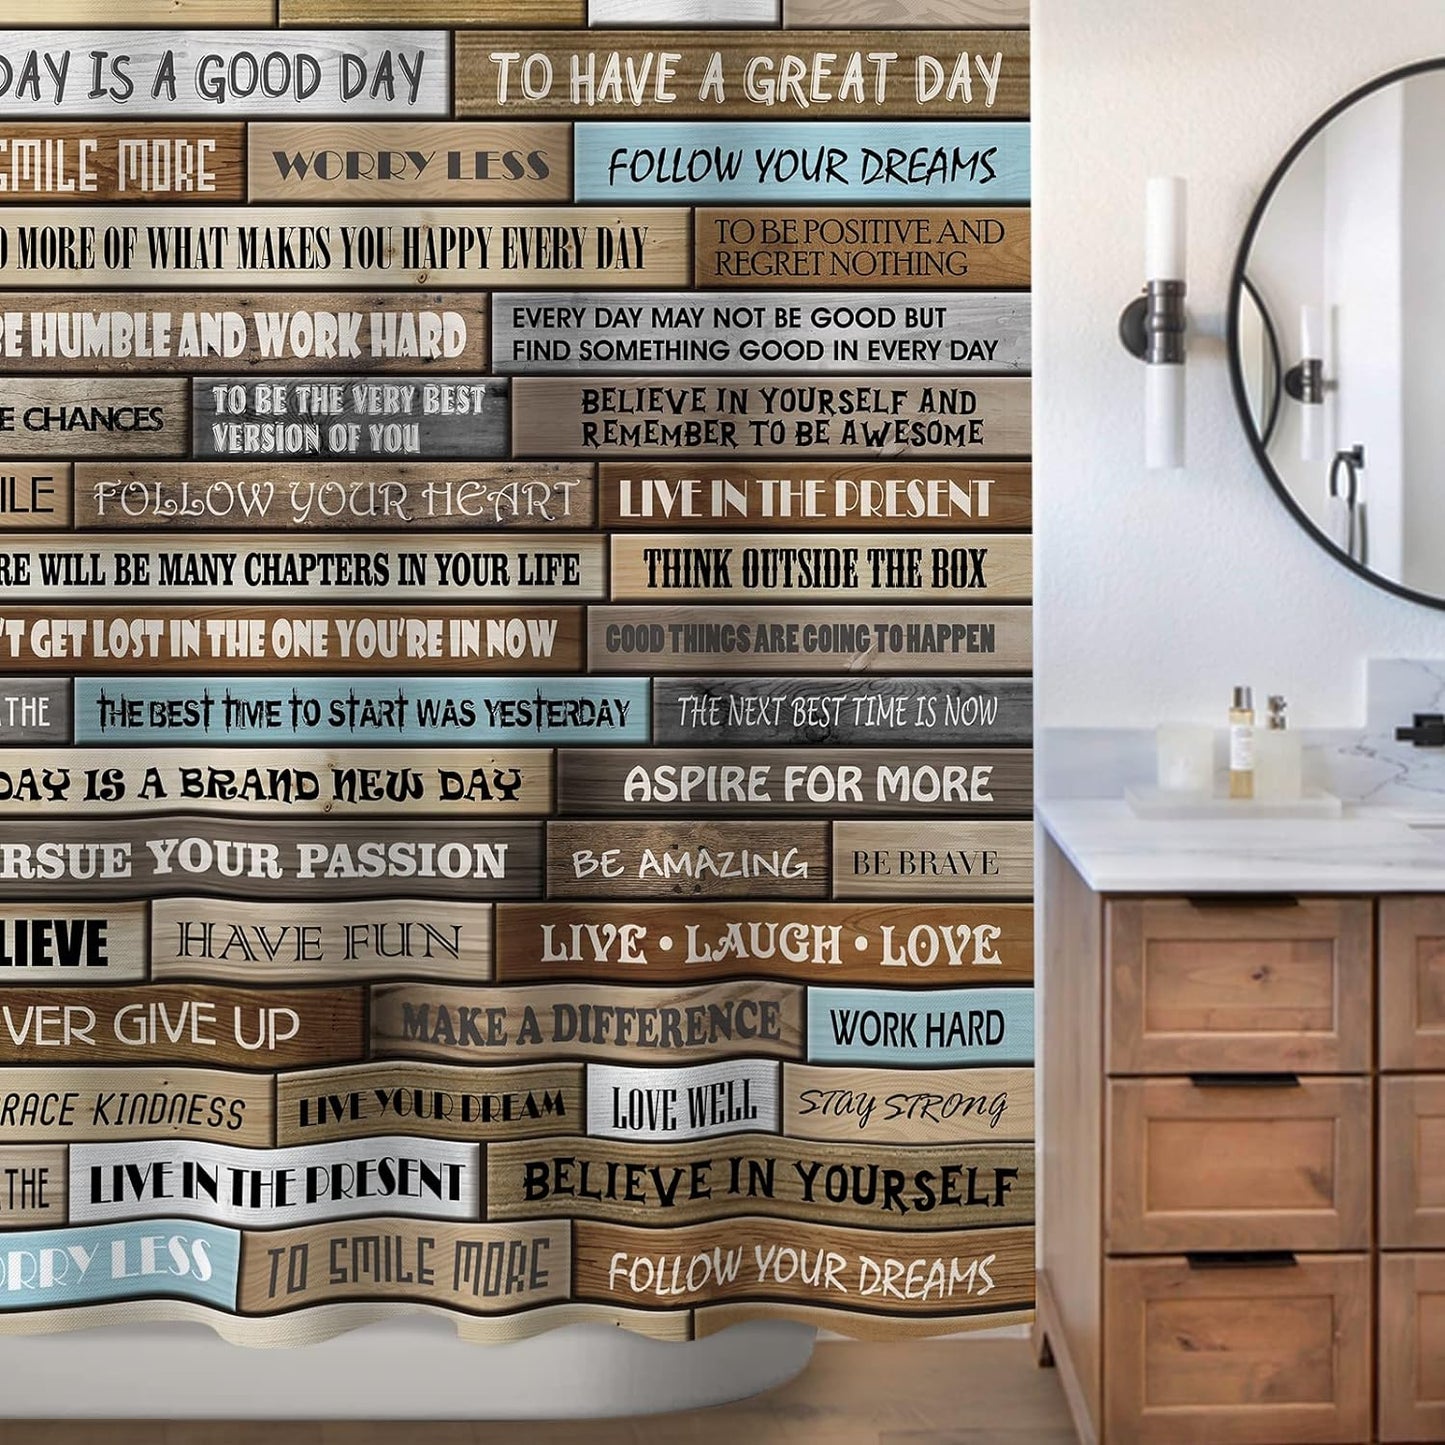 Sunlit Extra Long Inspirational Motivational Happiness Quotes for Courage Be Awesome Poster Print Rustic Cabin Shower Curtain Teak Closet Curtain Home Bathroom Decor Fabric Quote Tapestry